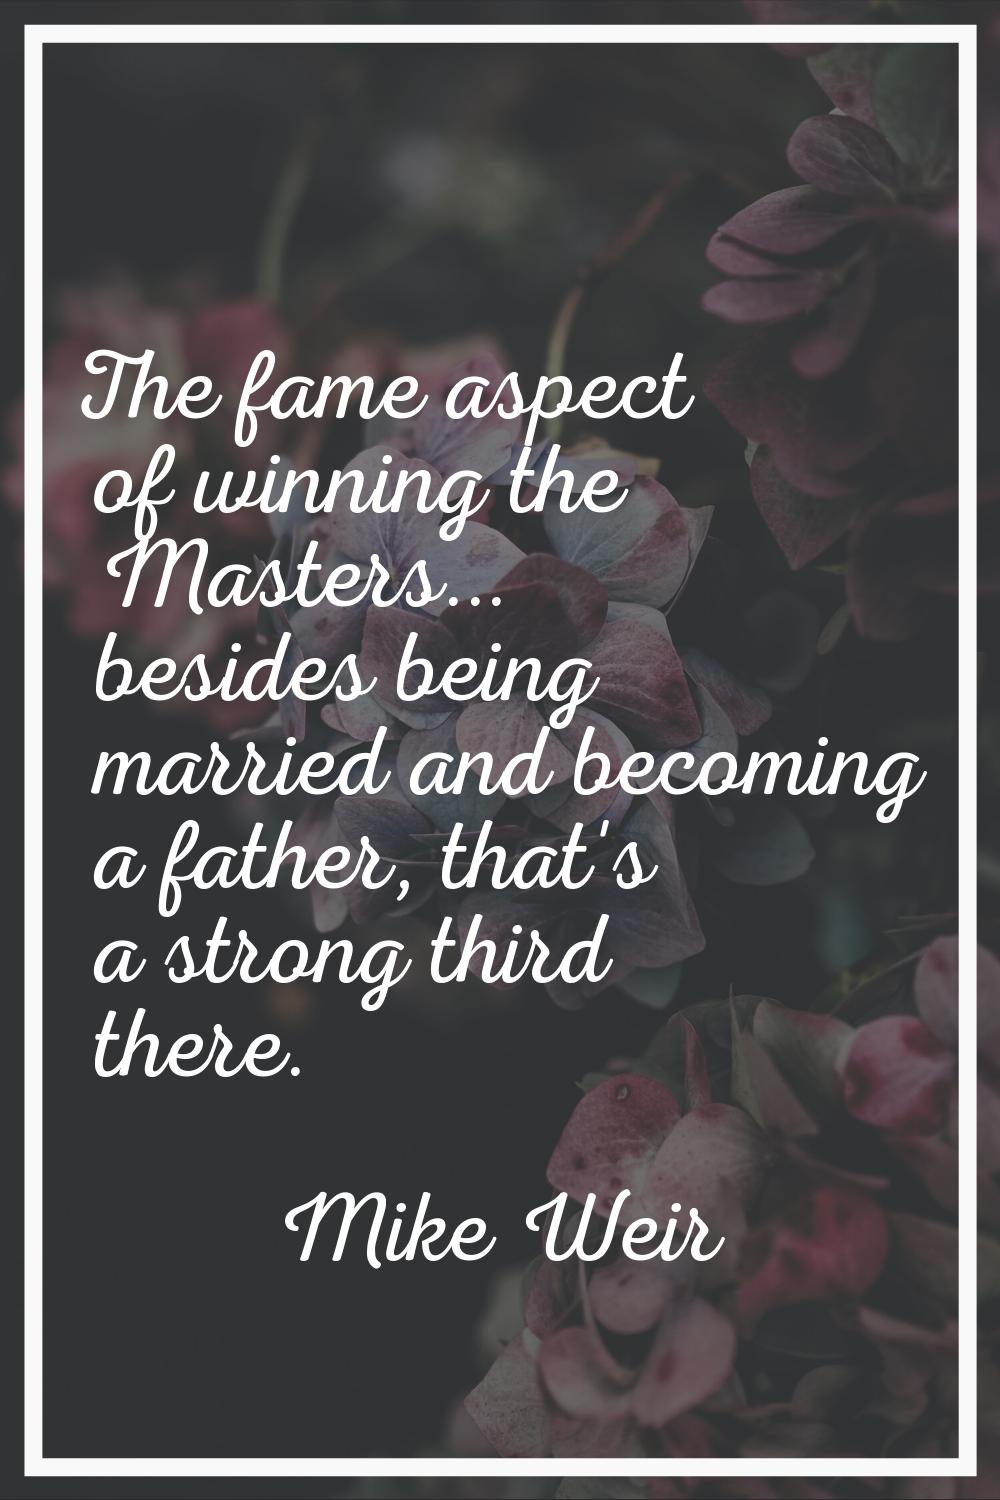 The fame aspect of winning the Masters... besides being married and becoming a father, that's a str